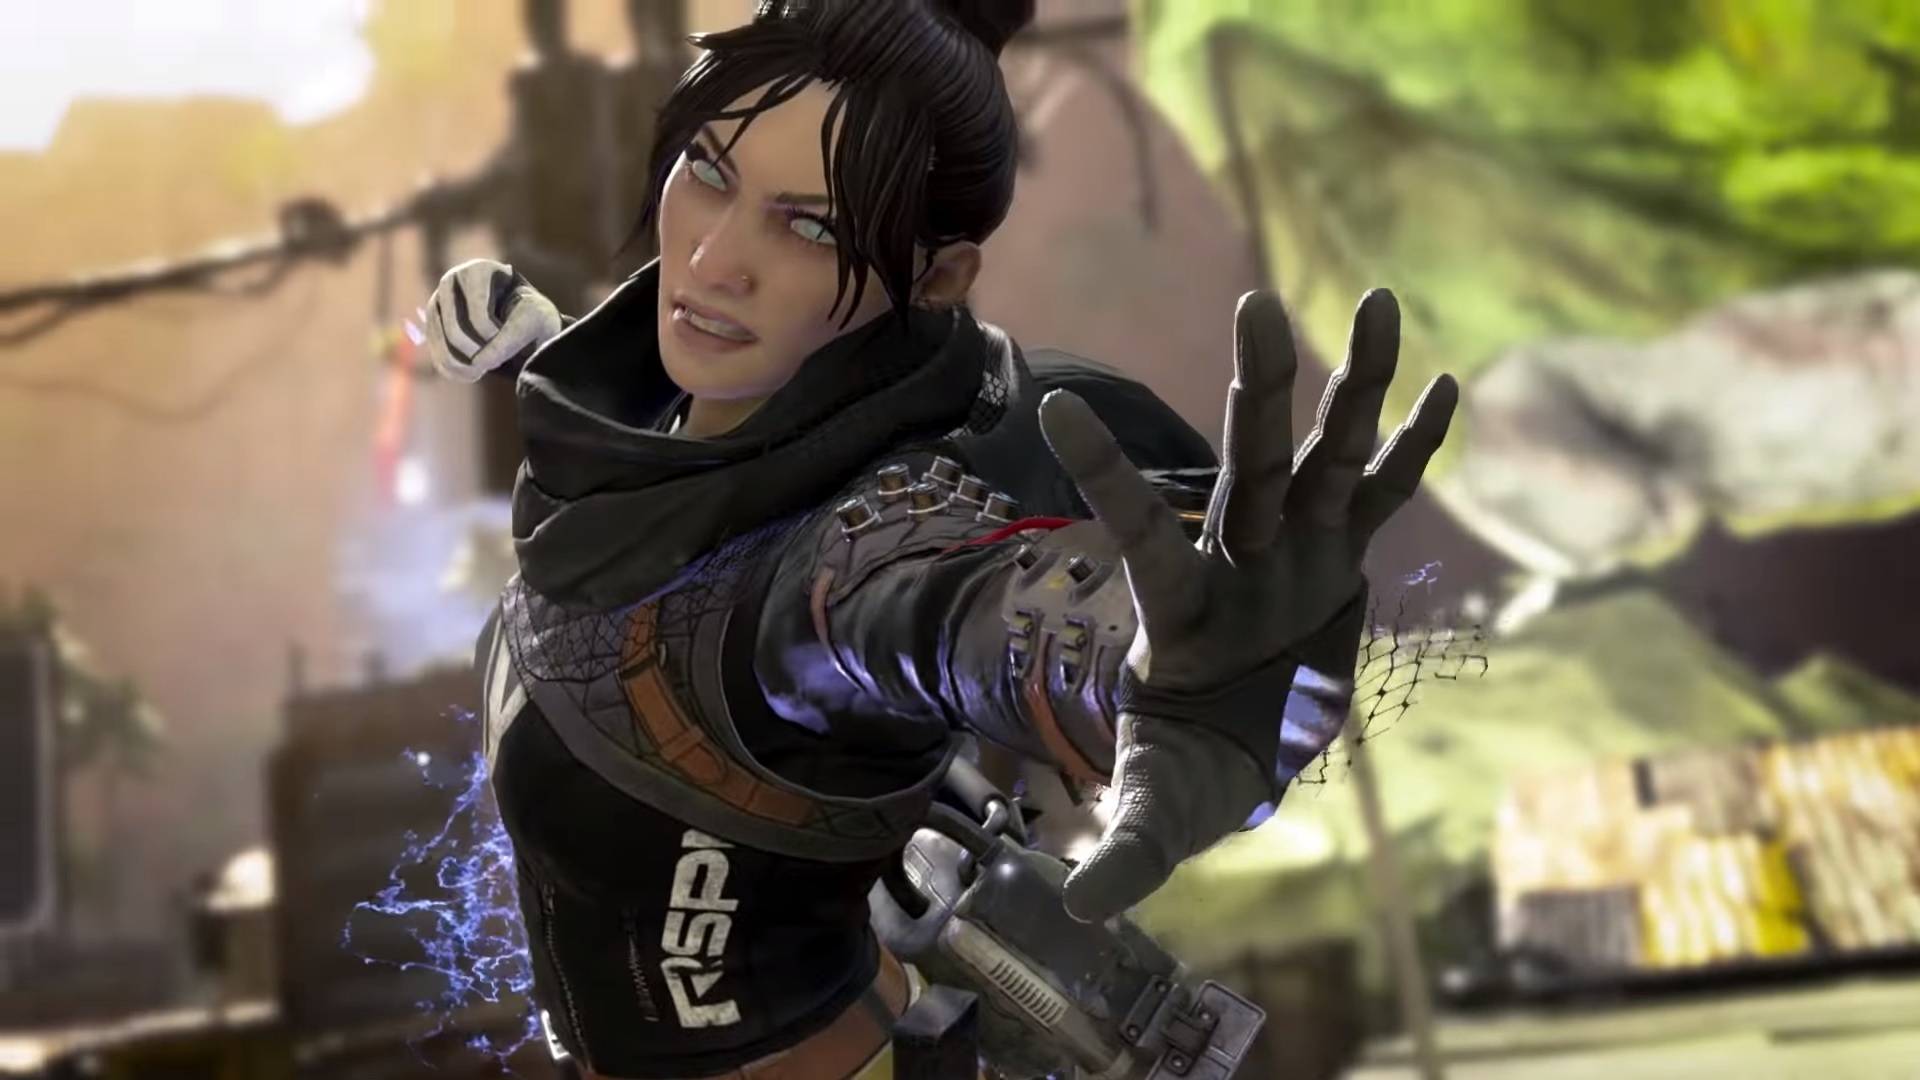 Big Apex Legends Update Coming Next Week, Patch Notes Released